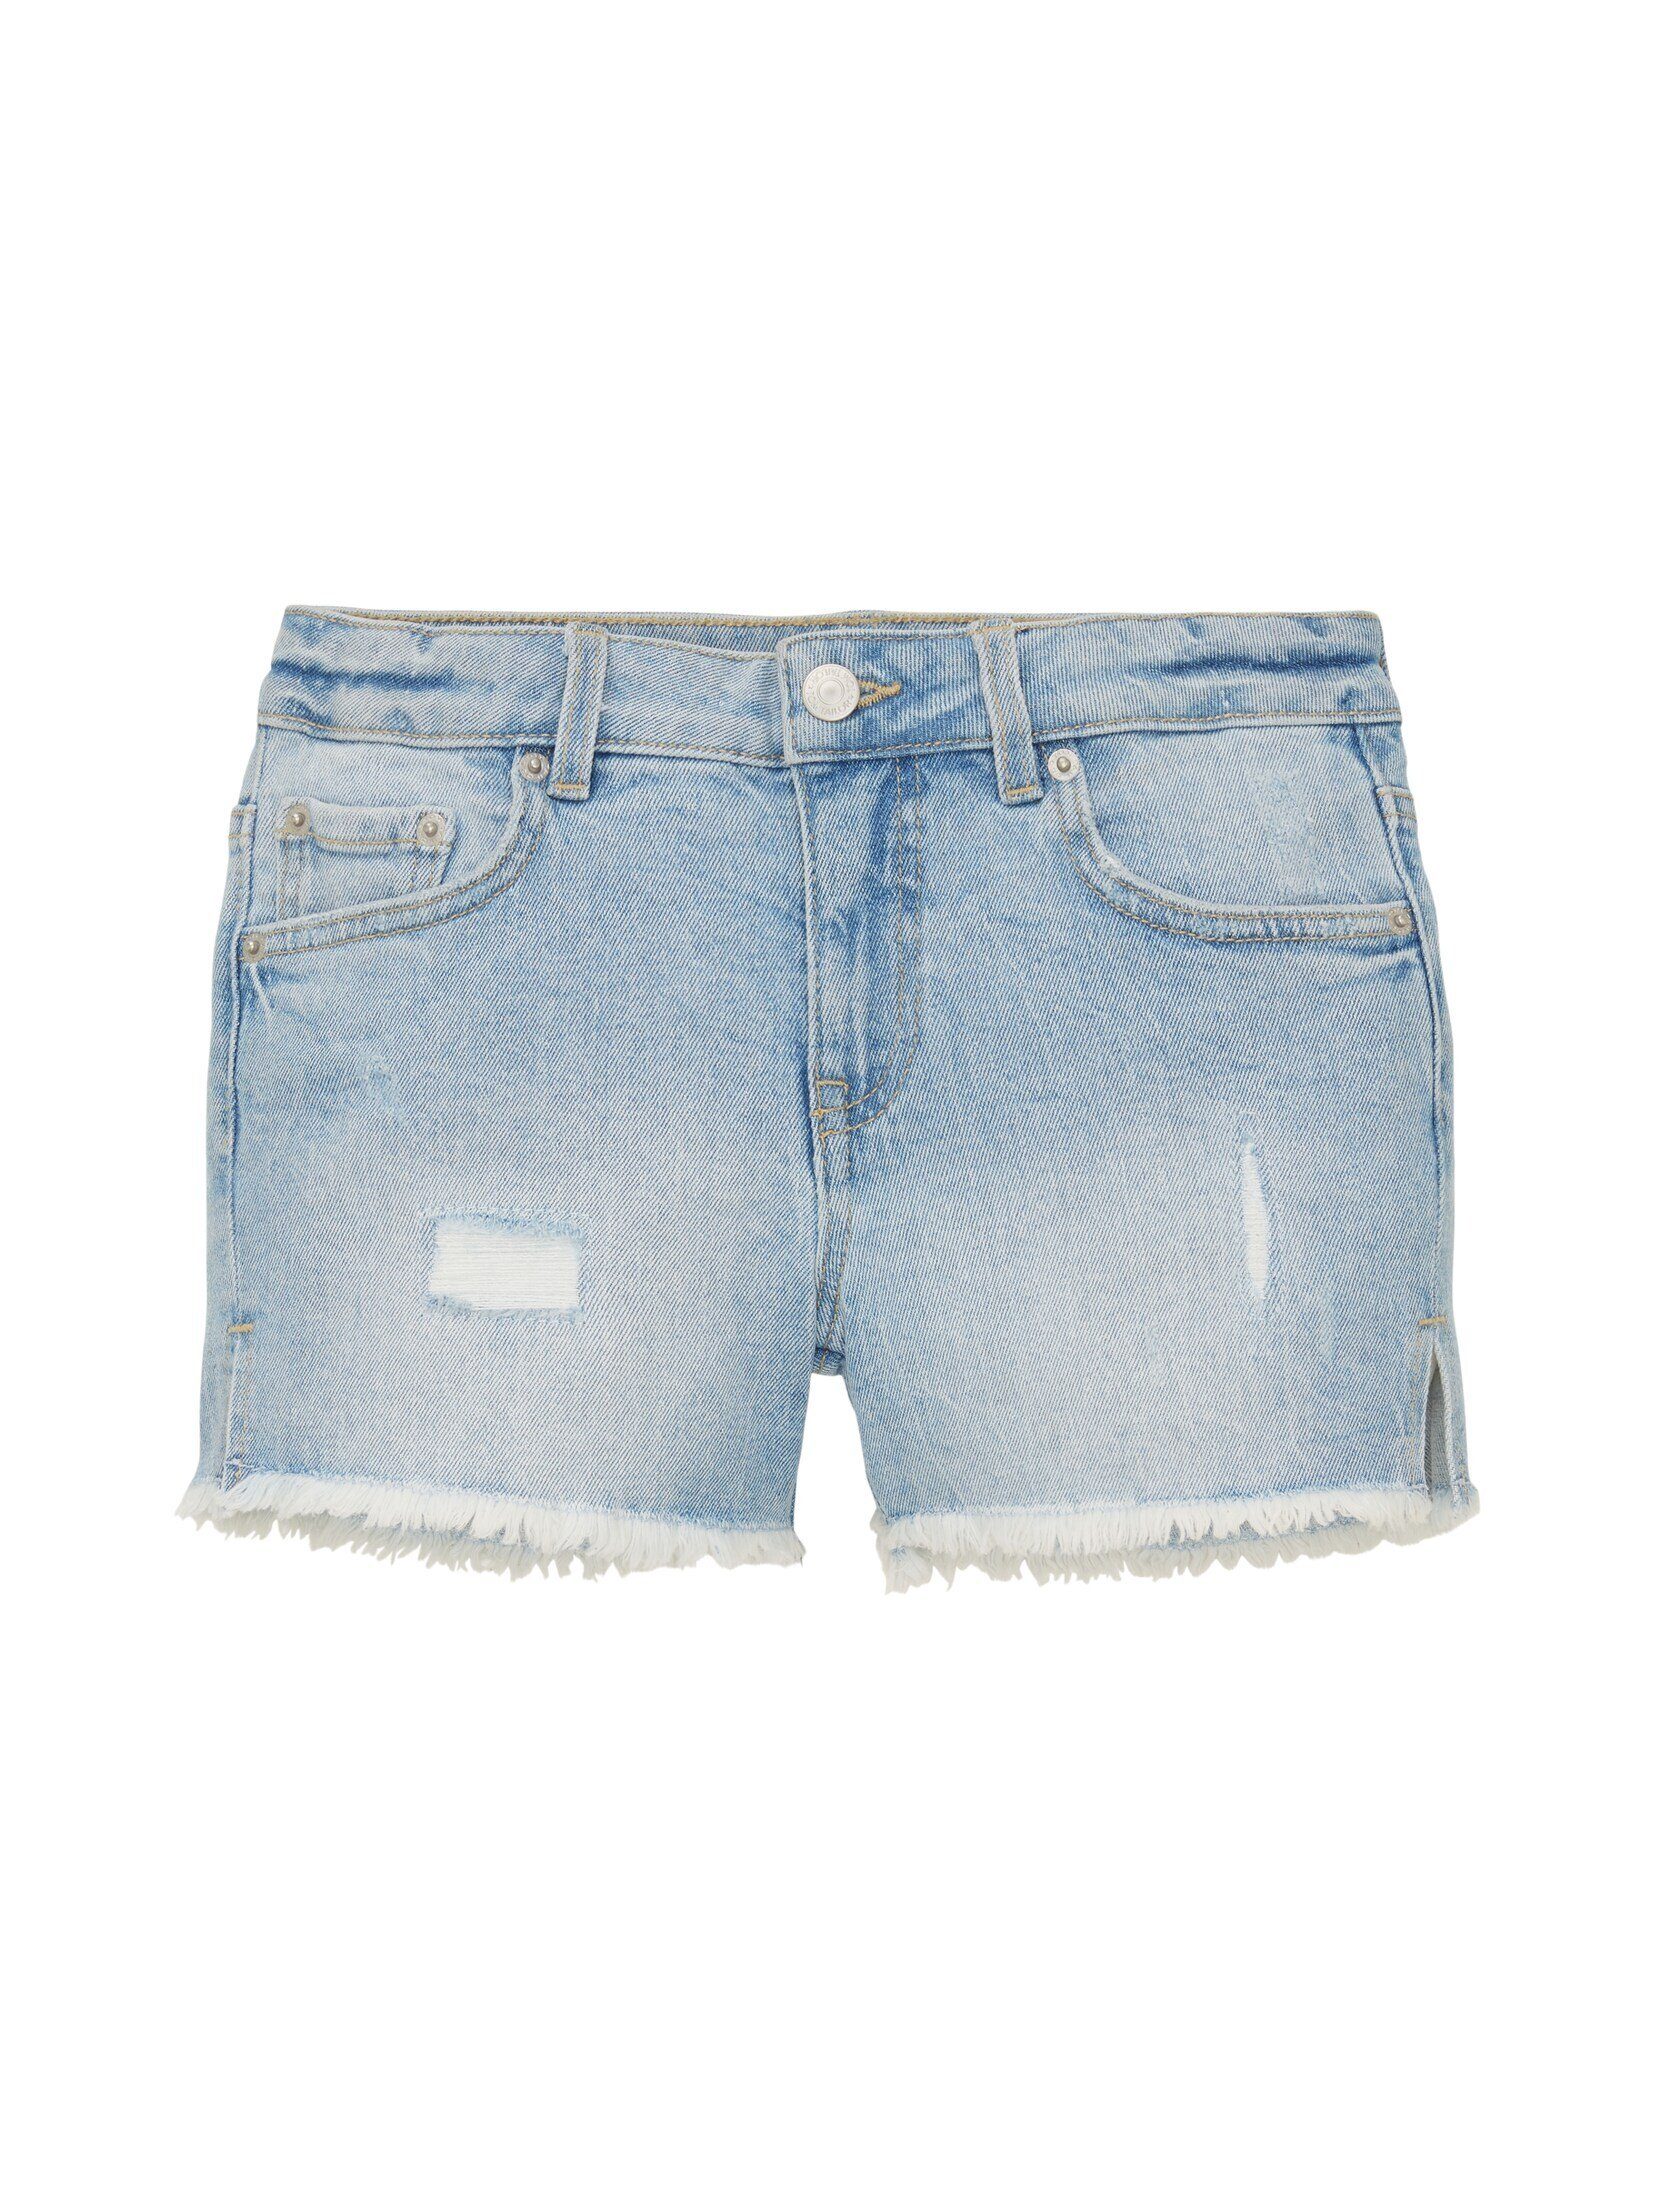 Jeans im Shorts TAILOR Used-Look TOM Jeansshorts